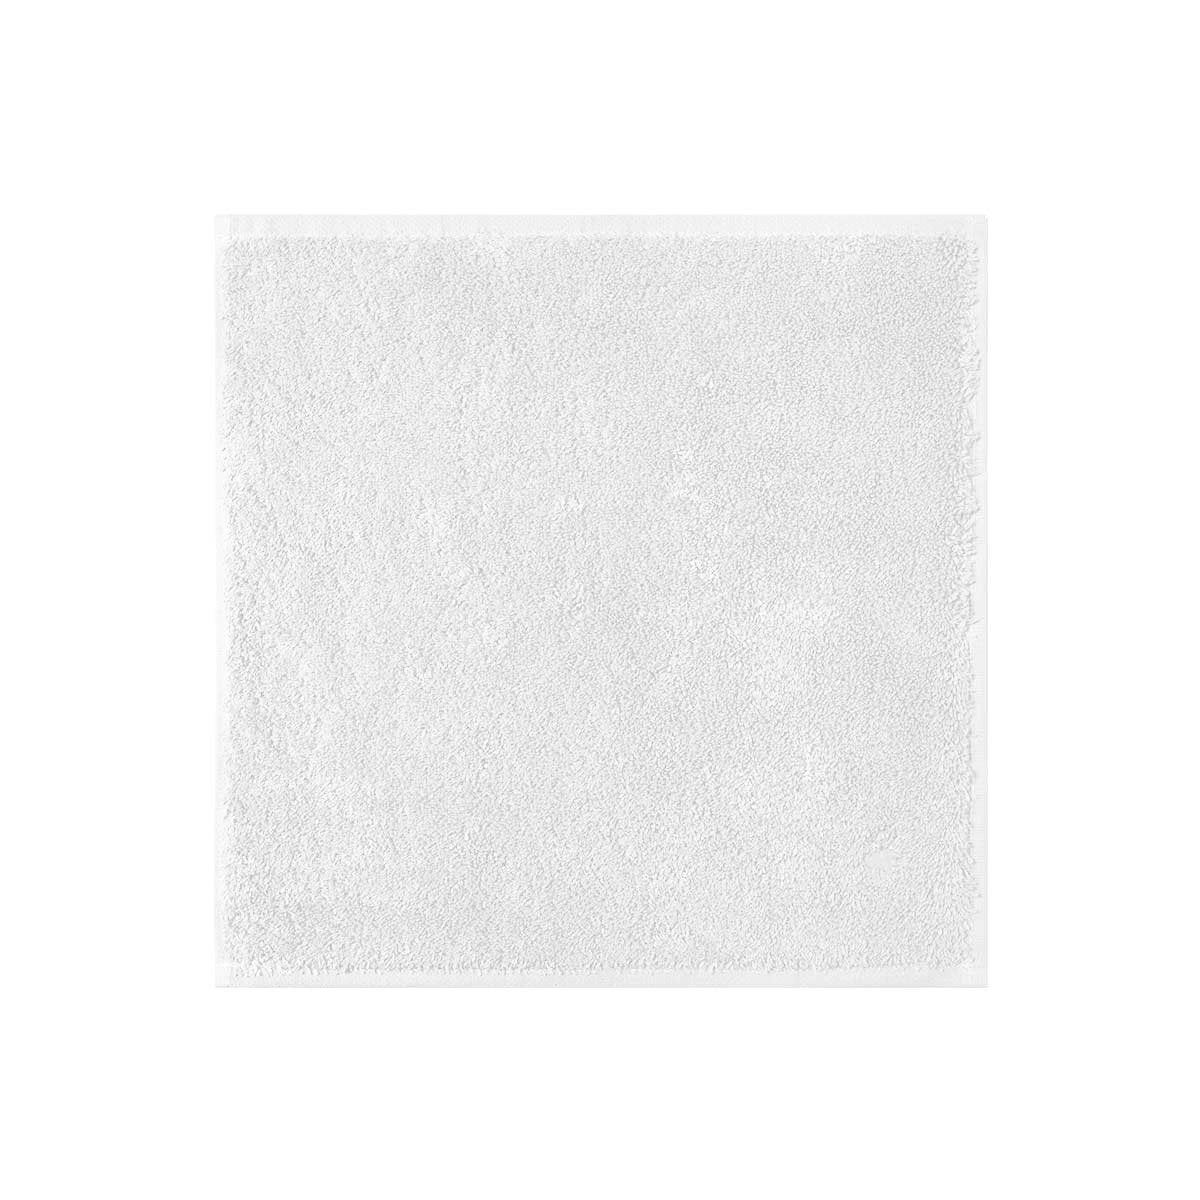 Etoile Blanc Bath Collection by Yves Delorme | Fig Linens - White wash cloth